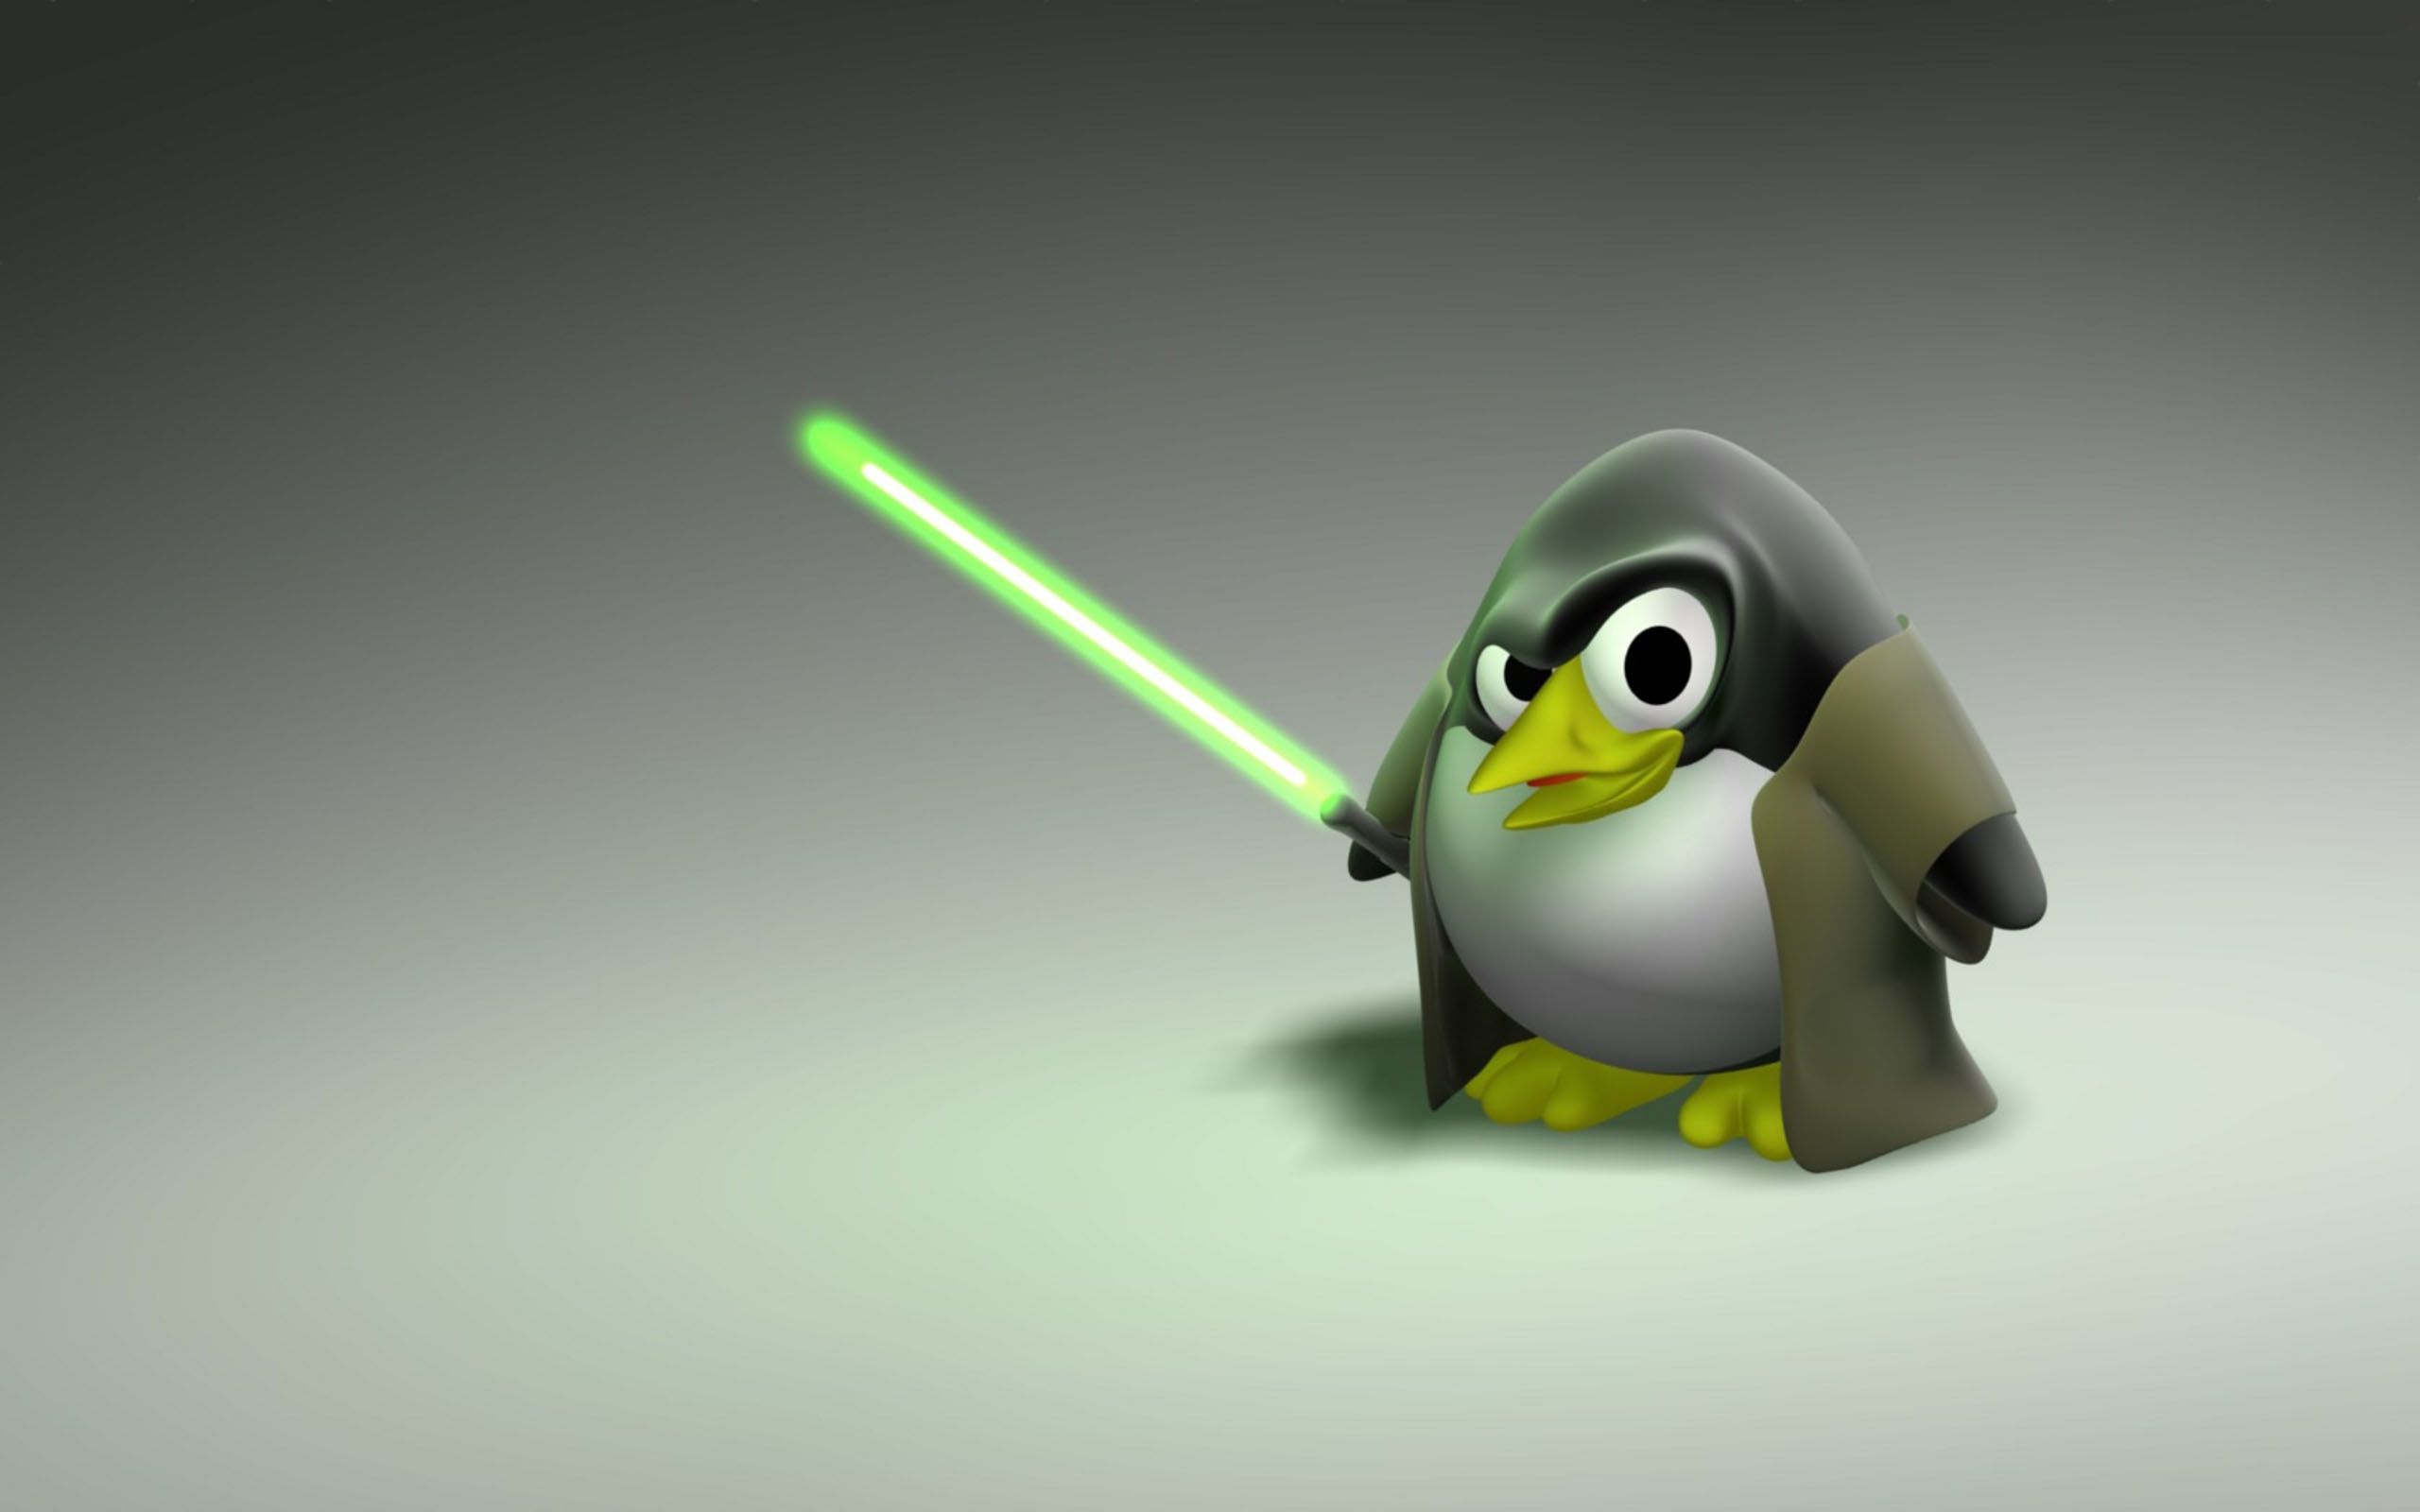 Download 45 Awesome Linux Wallpapers Linux wallpapers Linux 2560x1600